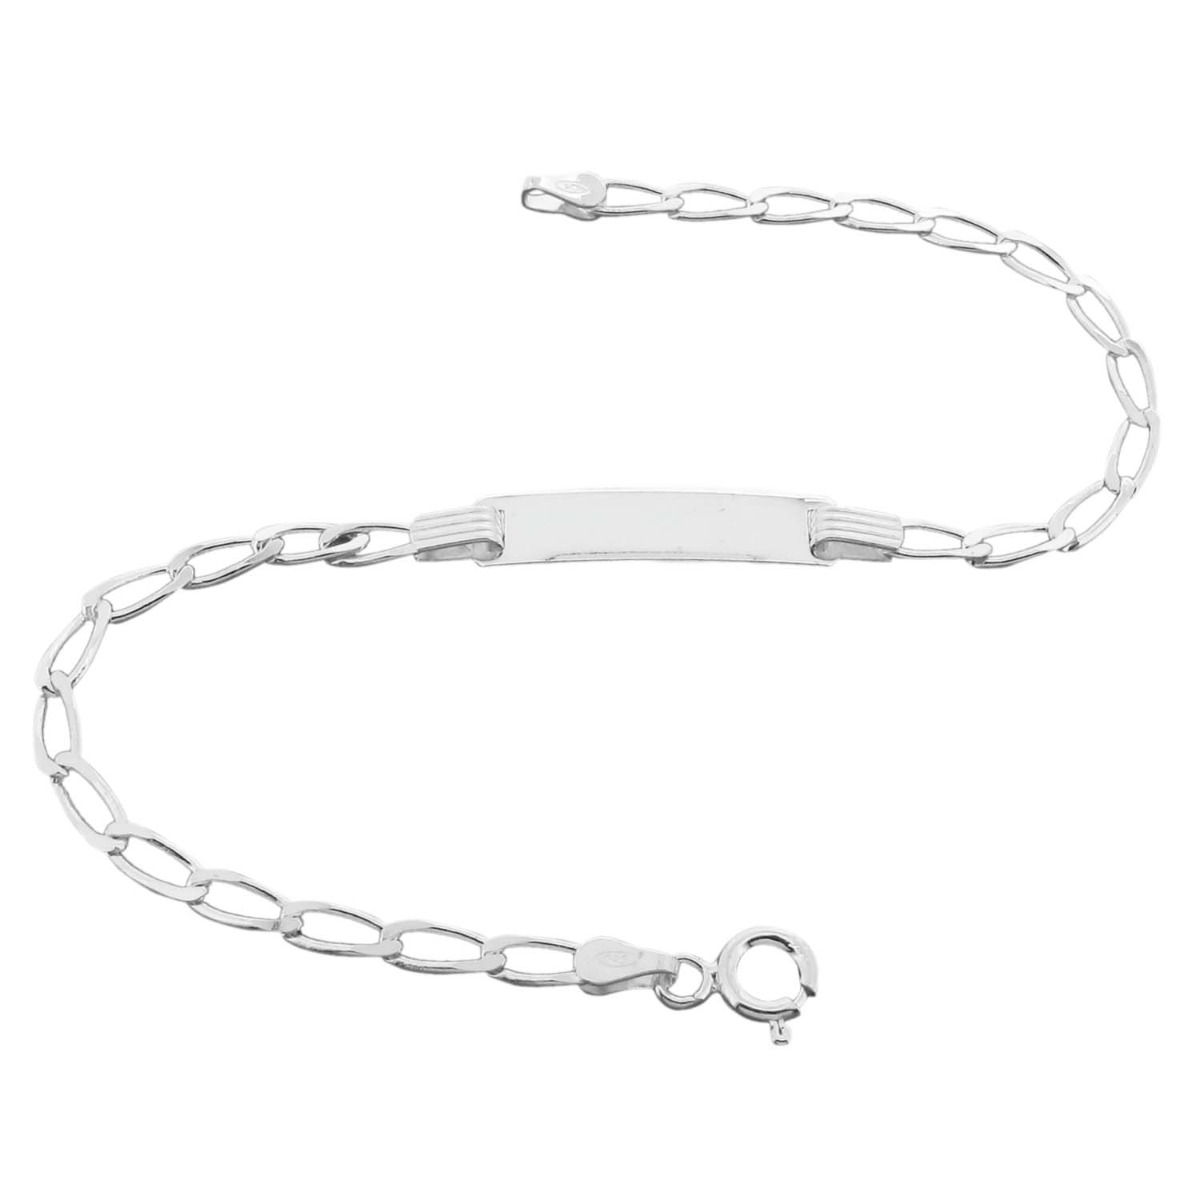 Ladies Sterling Silver ID Bracelet With Optional Engraving